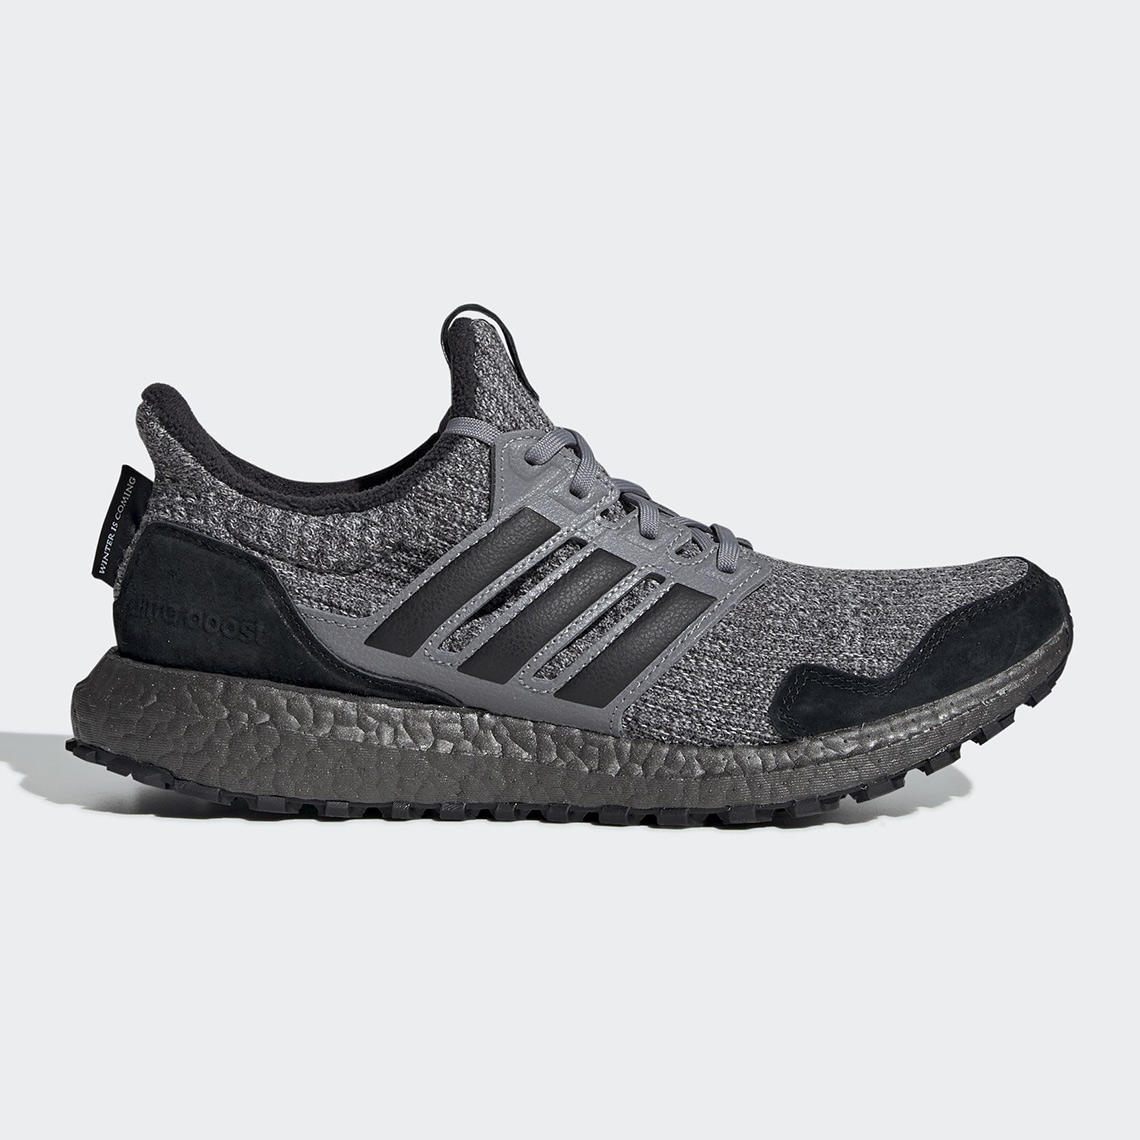 Game Of Thrones adidas Shoes - Full 